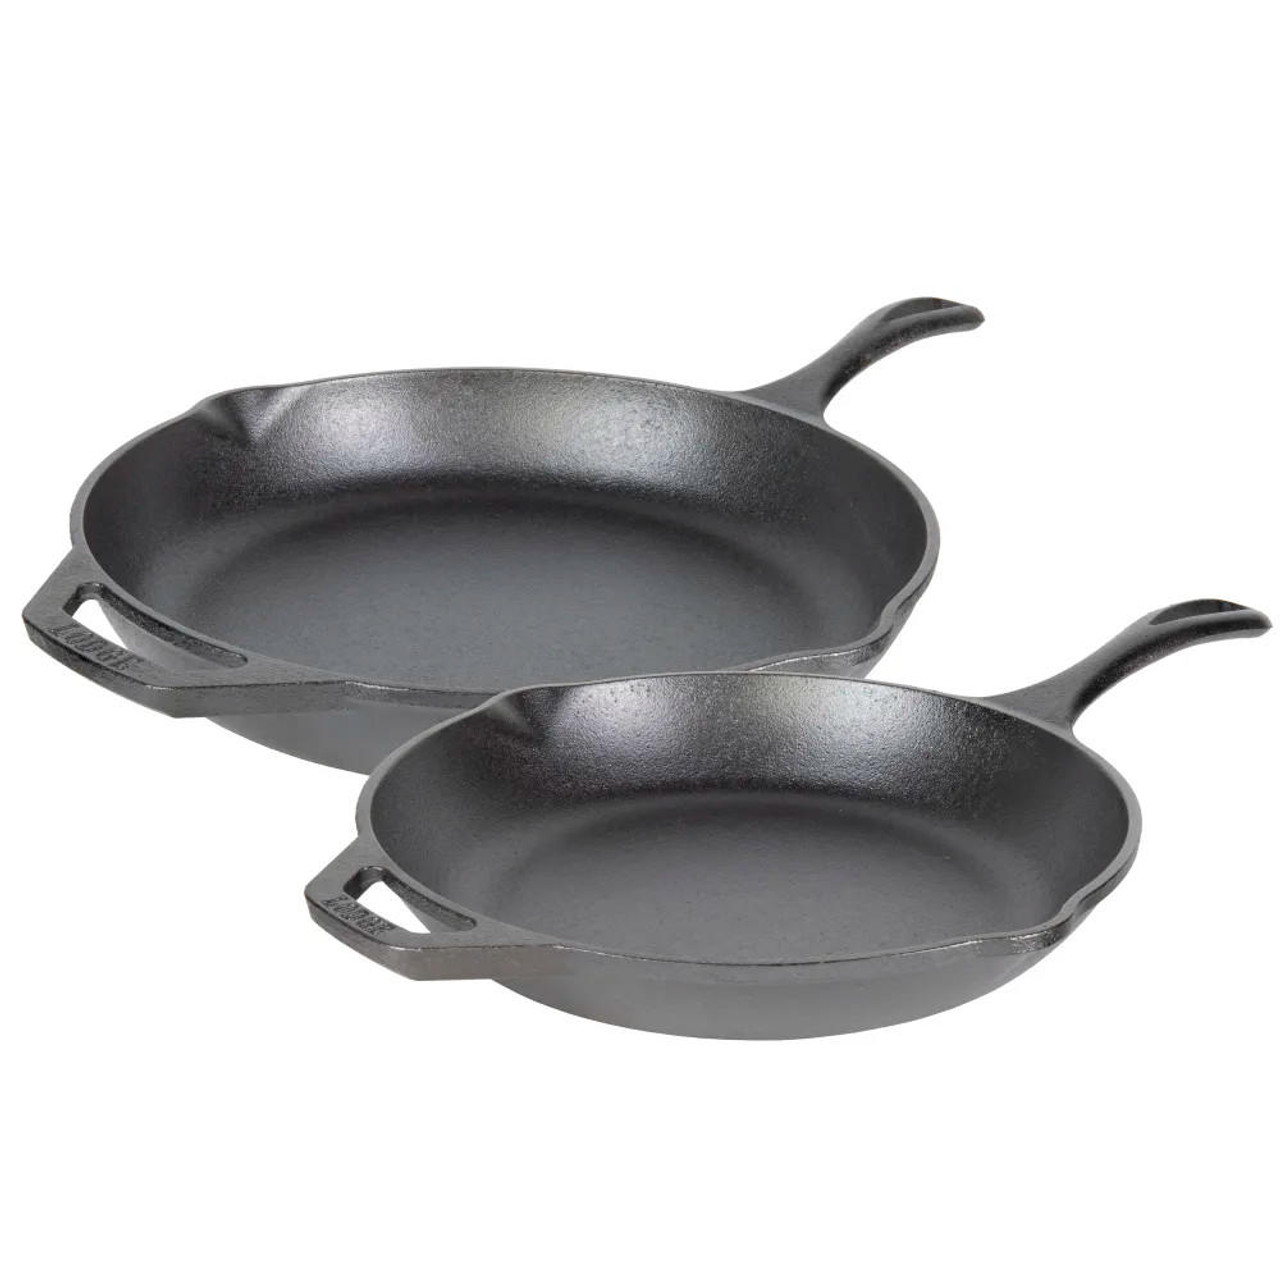 LODGE Lodge 2-Piece Seasoned Skillet Set, Cast Iron - Chef Collection with Skillets 